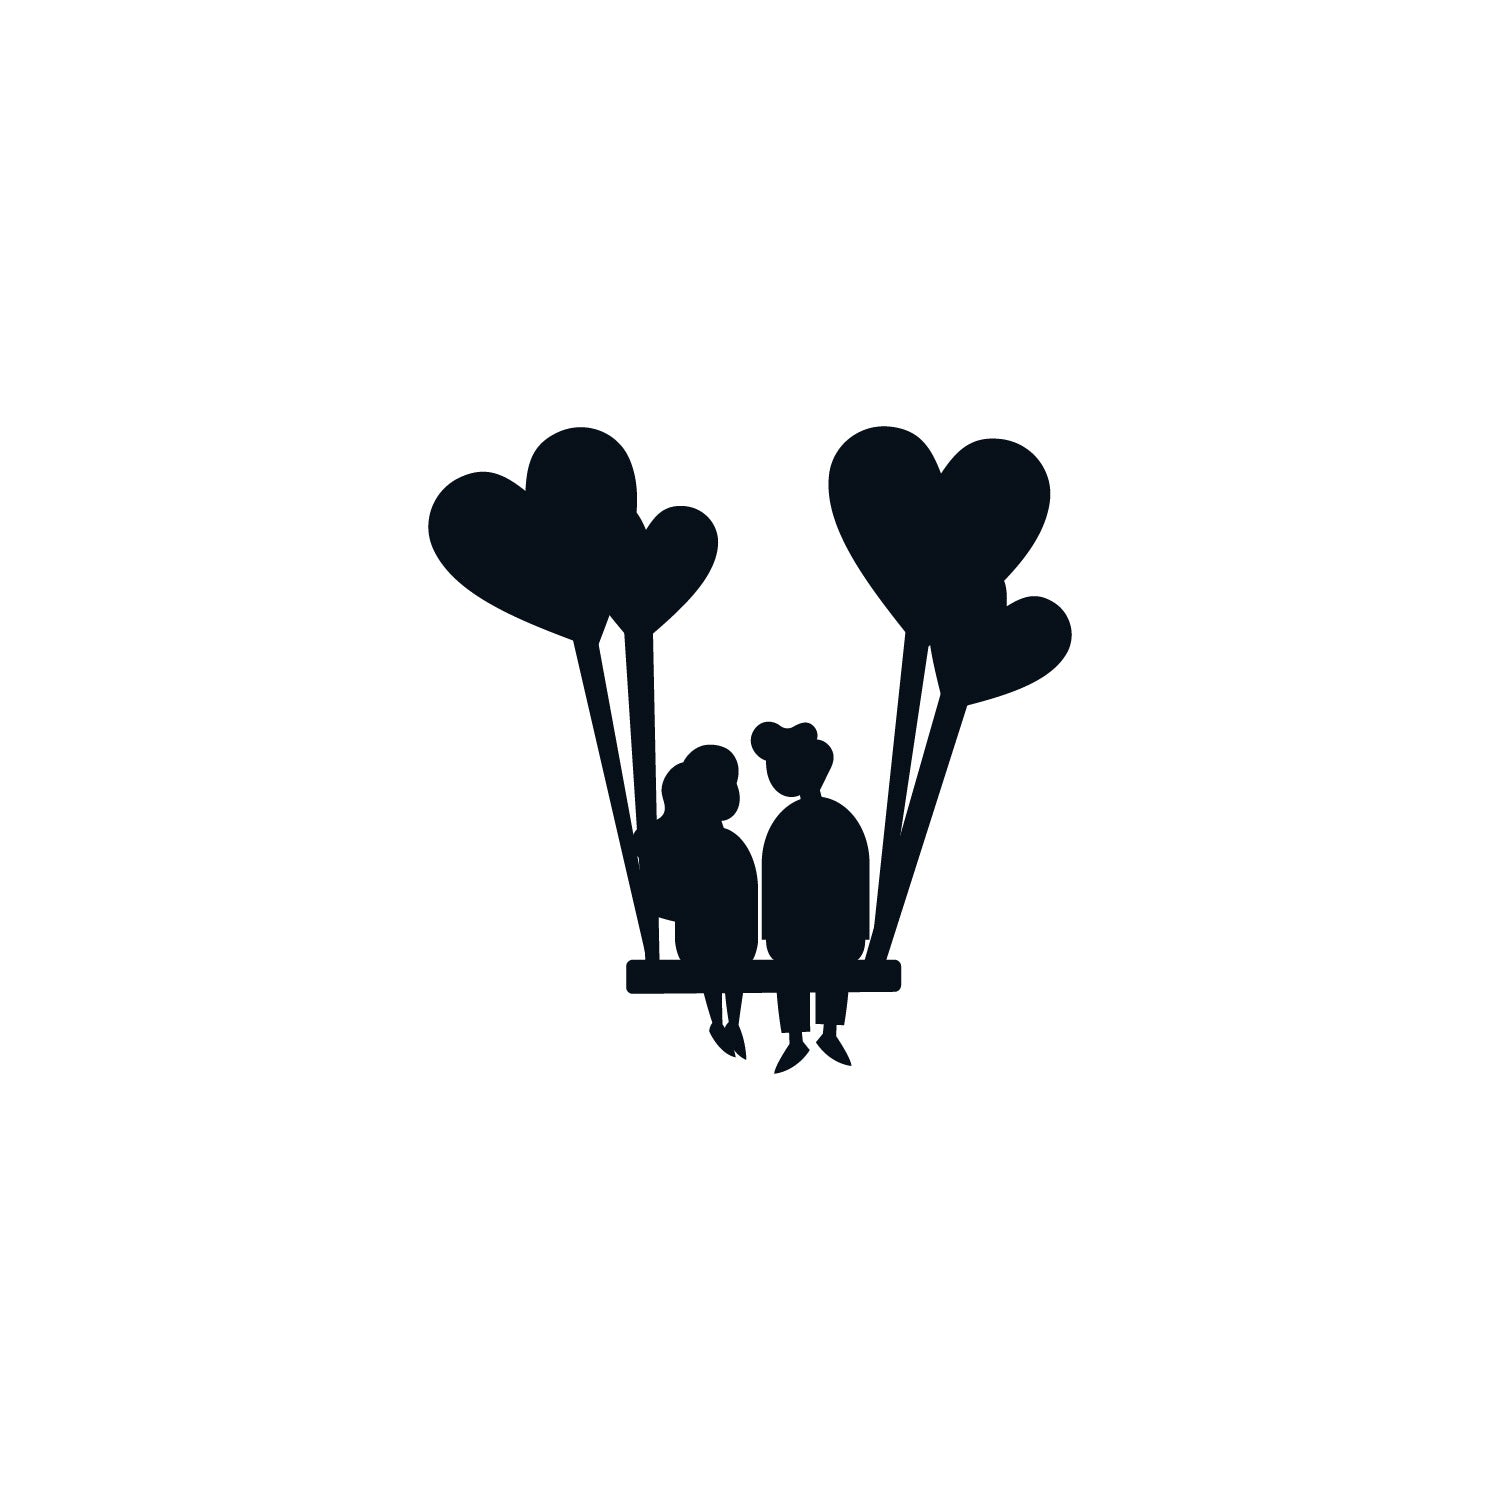 Young Loving Couple with Hearts Balloons Black Engineered Wood Wall Art Cutout, Ready to Hang Home Decor 2